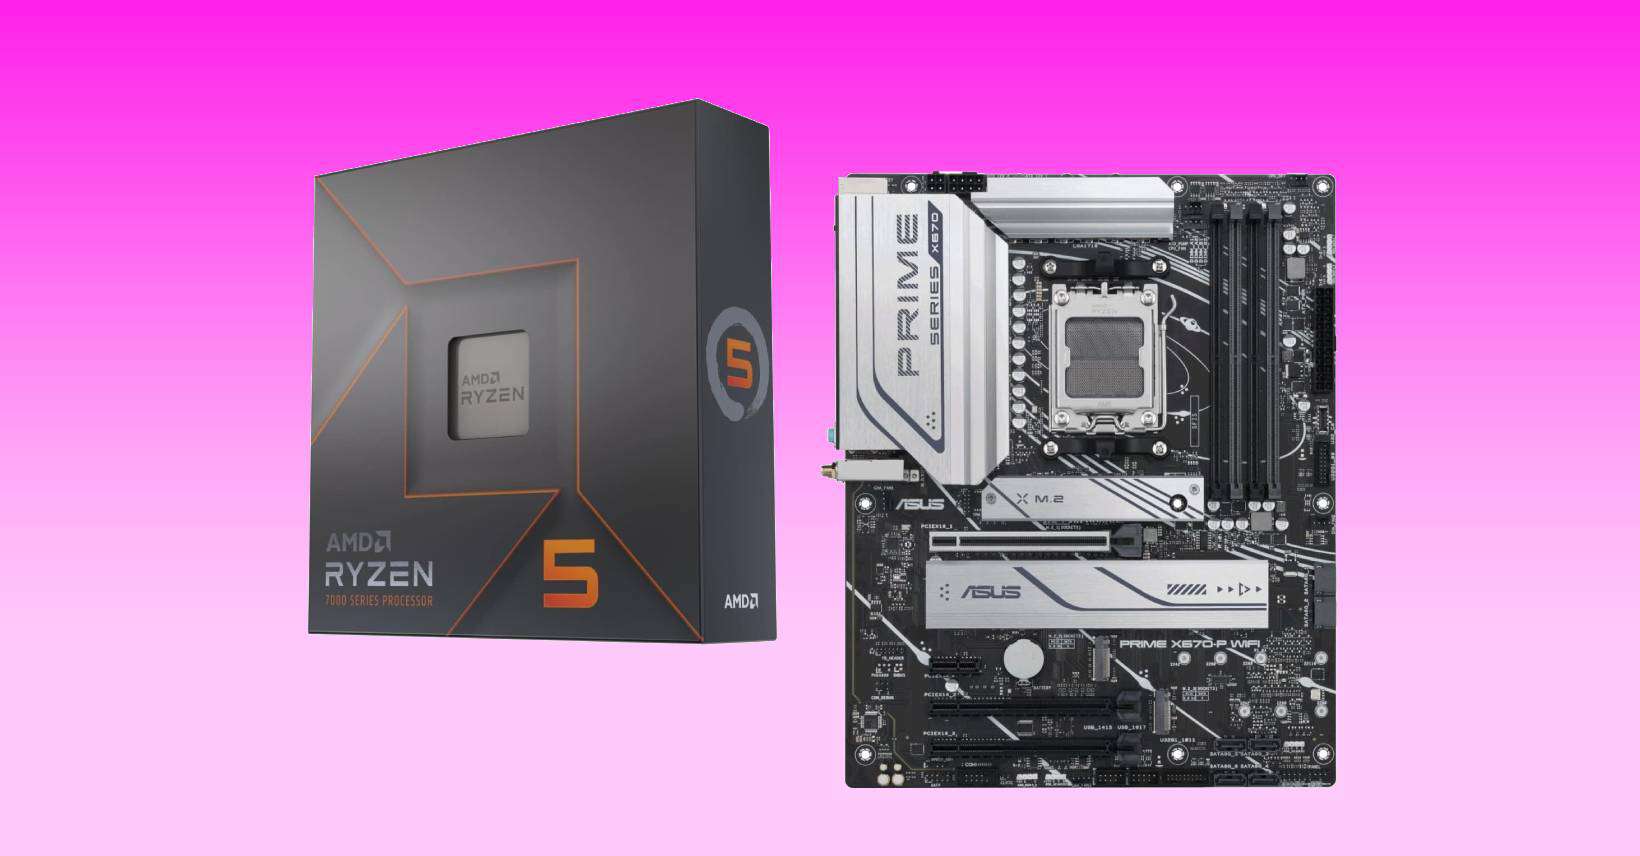 Kick-start your new PC build with epic CPU & Motherboard combo deal on Amazon